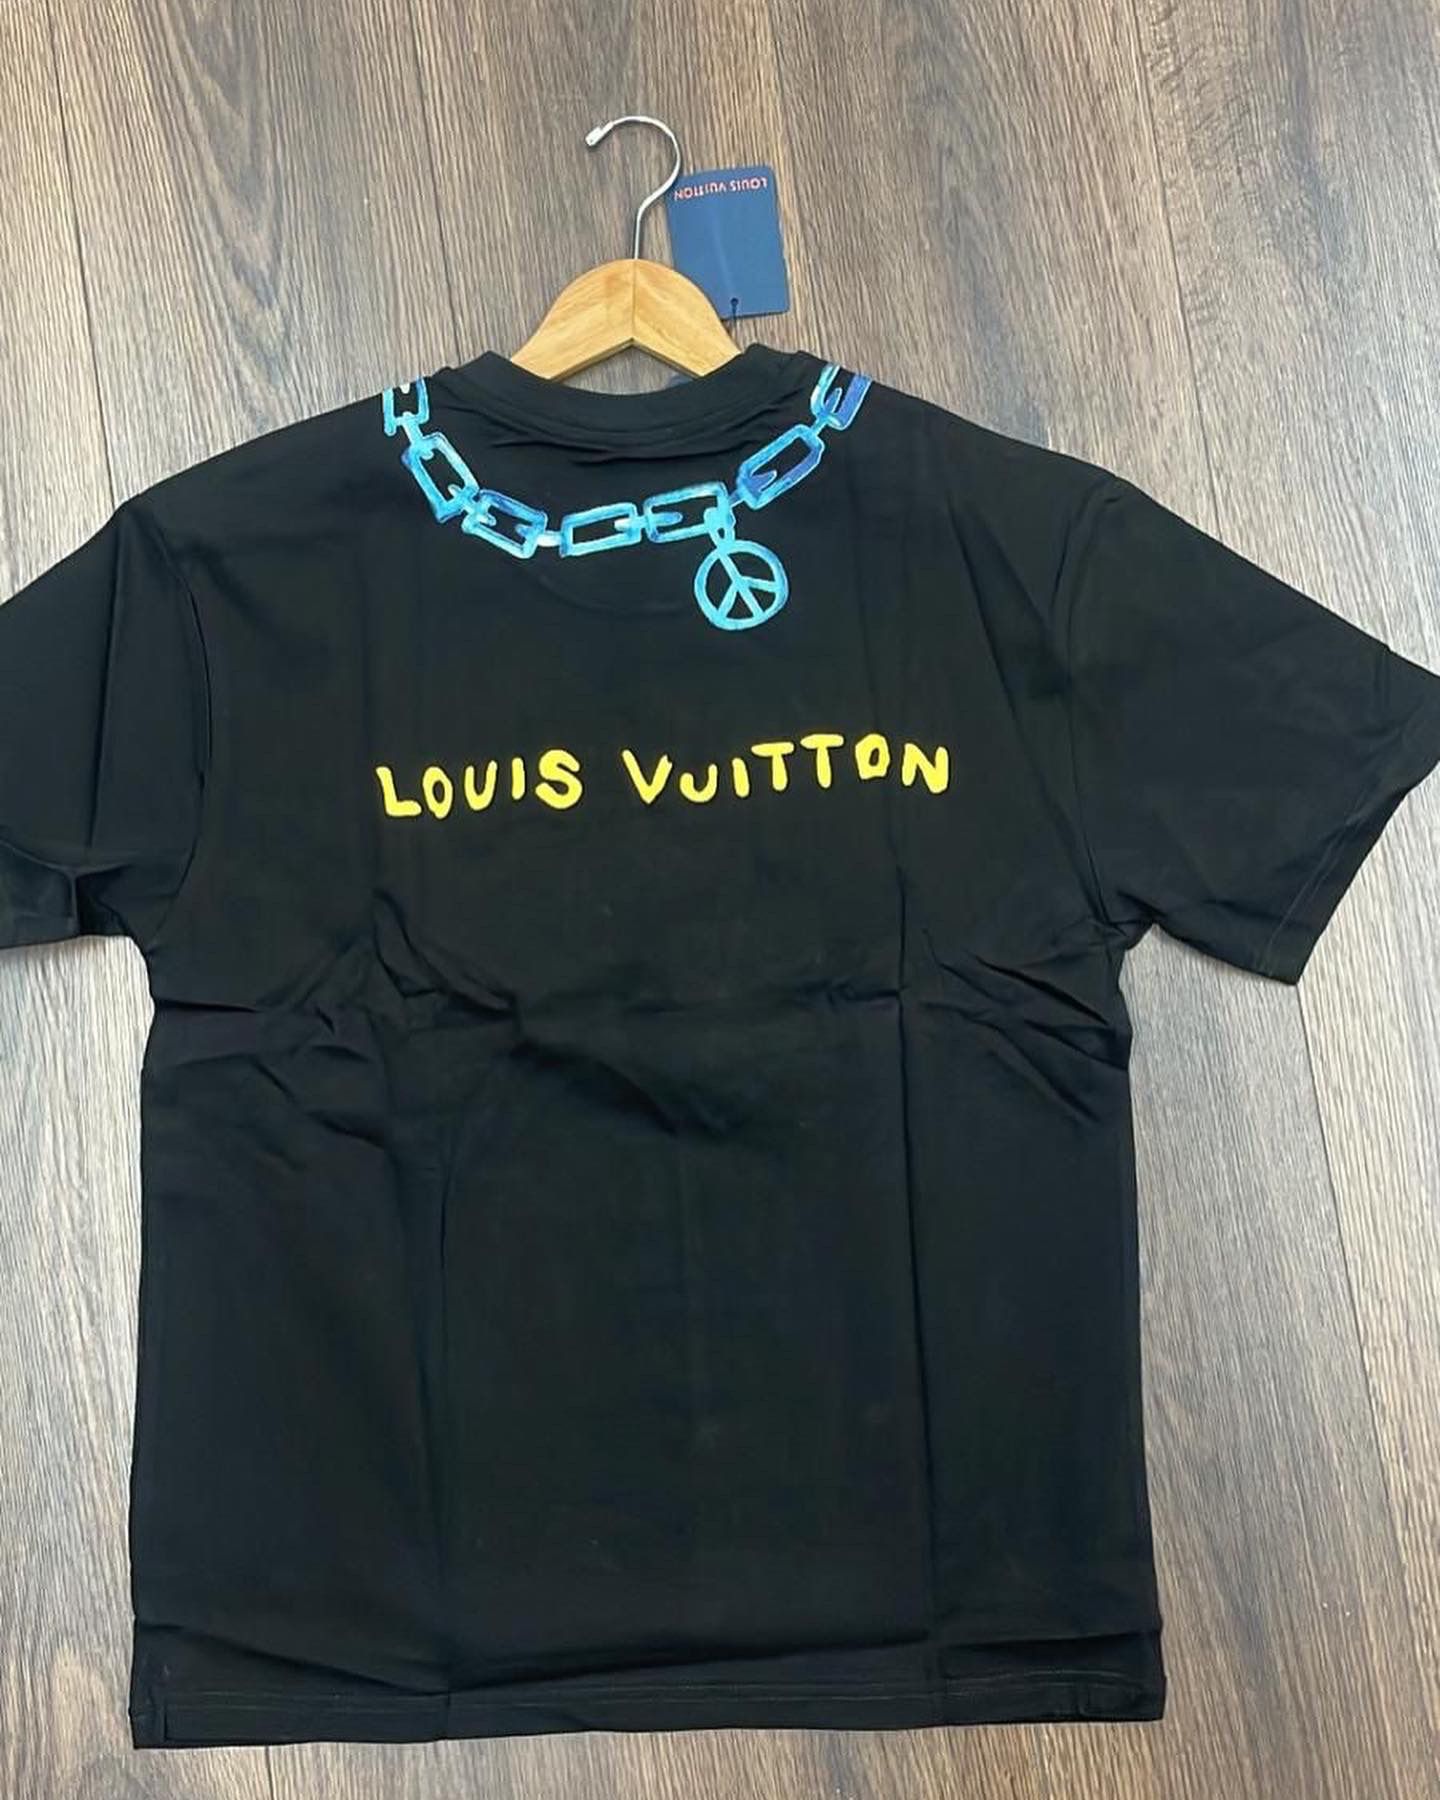 LV Short Sleeved Denim Workwear Shirt for Sale in Yonkers, NY - OfferUp